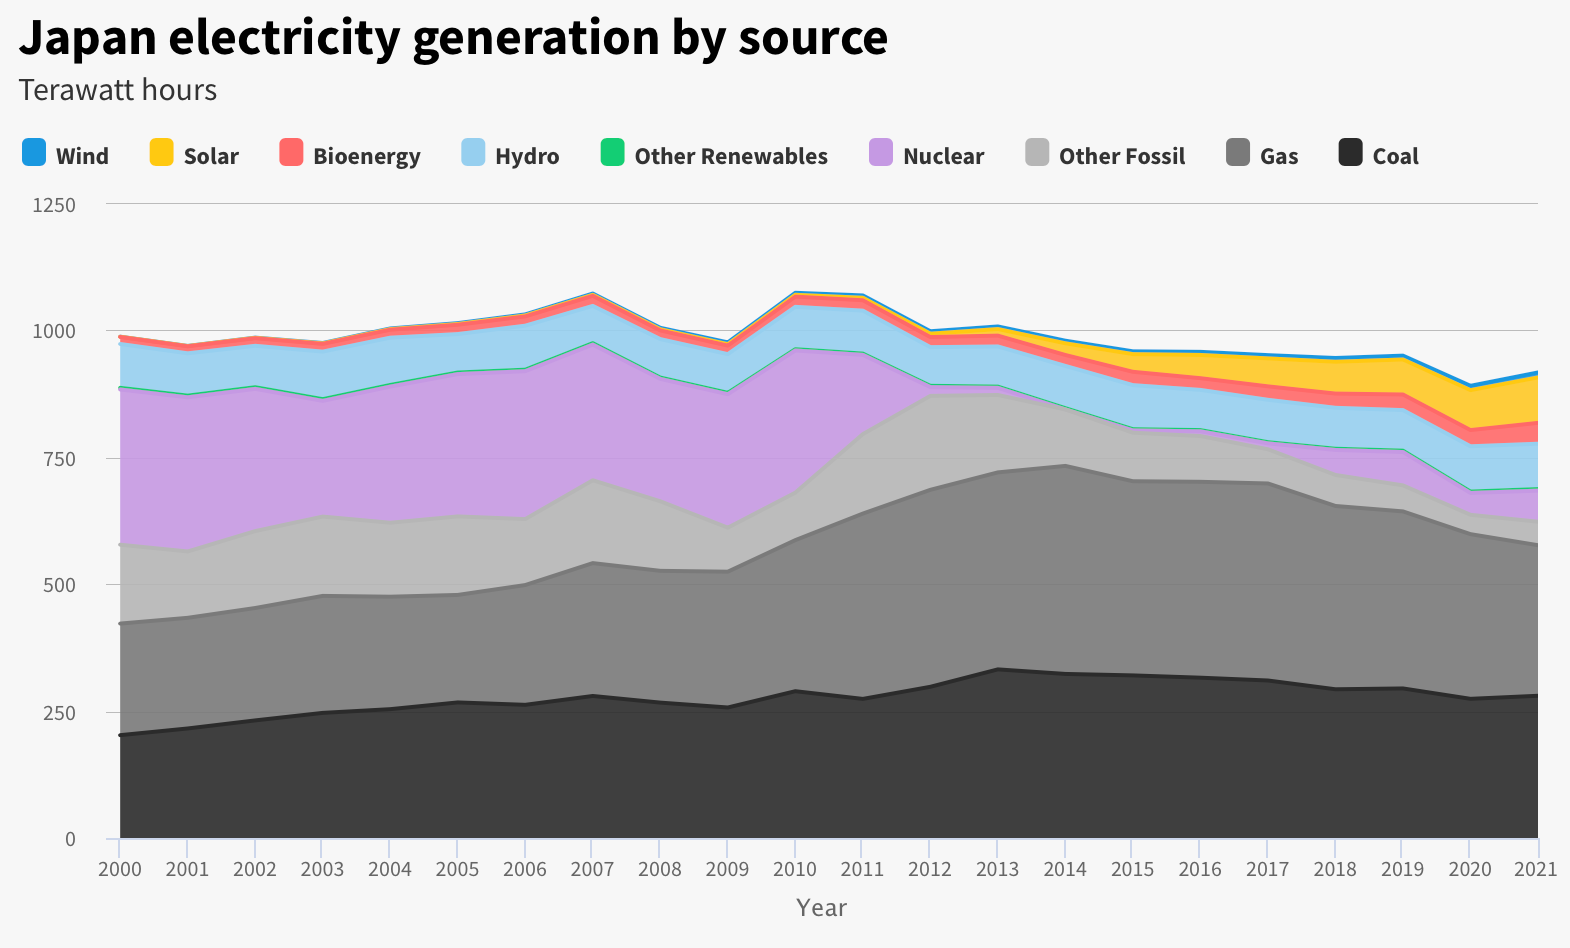 An area chart of Japan electricity generation by source, showing a drop in nuclear and corresponding increase in coal and gas, with solar and wind increasing over time from 2011 onward